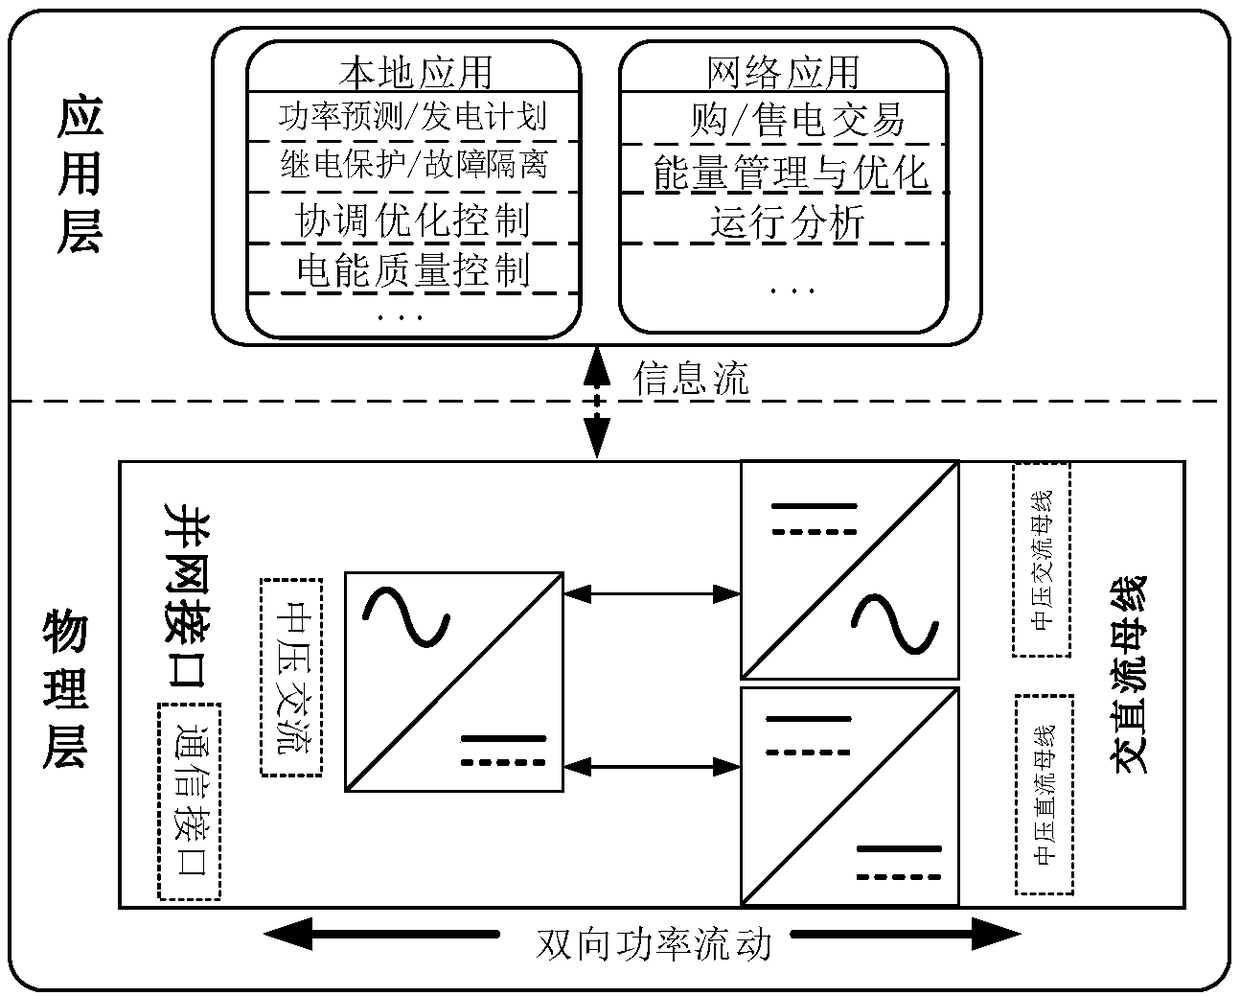 Regional energy interconnected distribution network system based on power routing technology